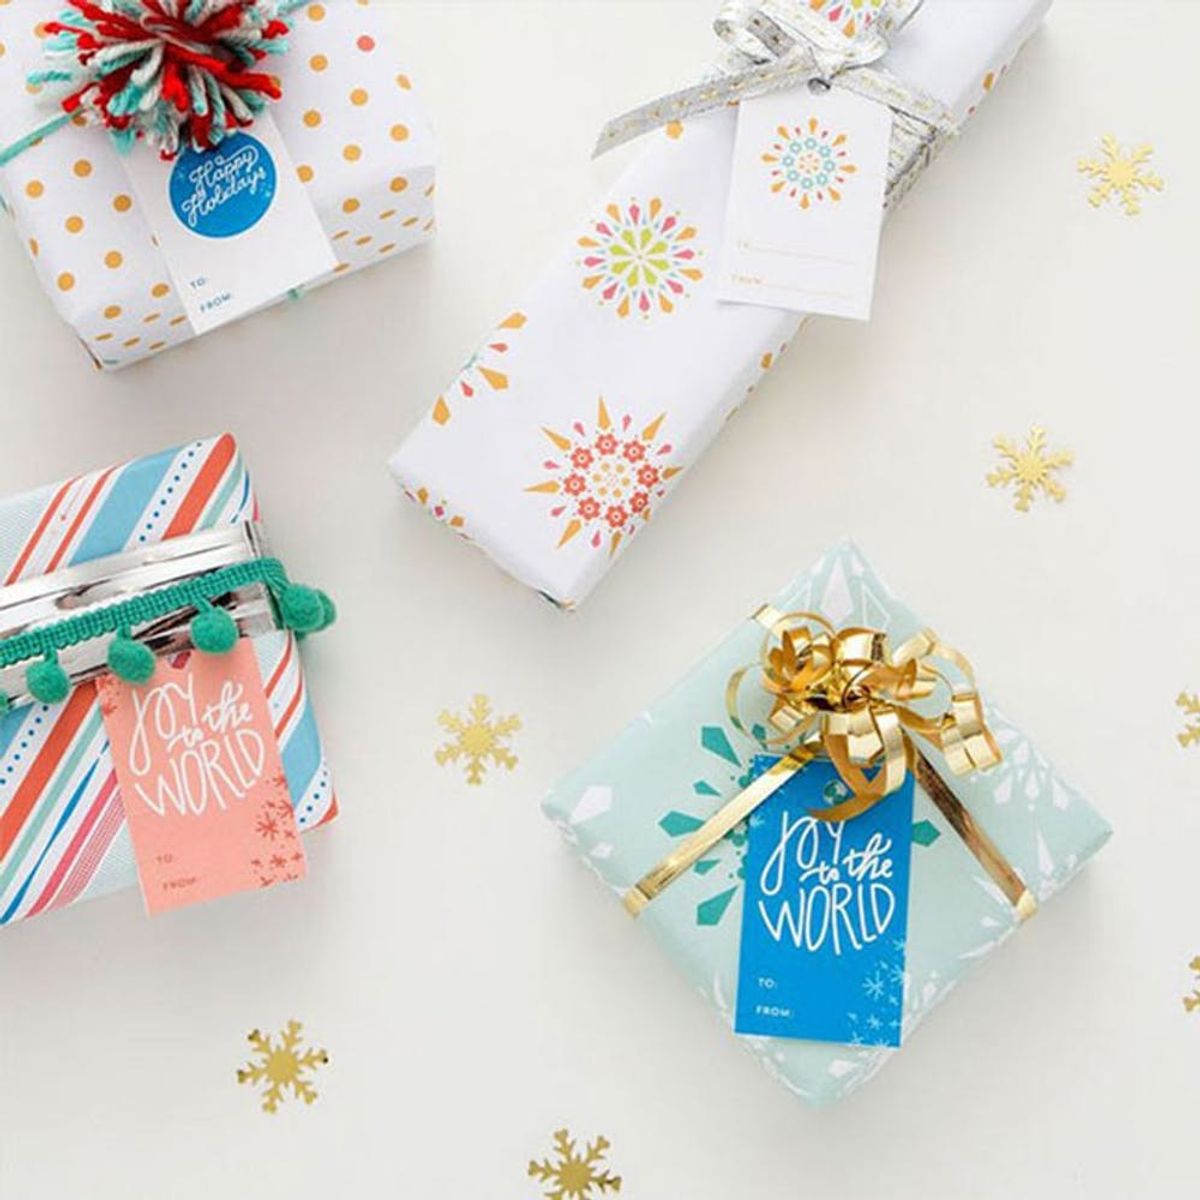 14 Printable Holiday Gift Tags to Amp Up Your Wrap Game